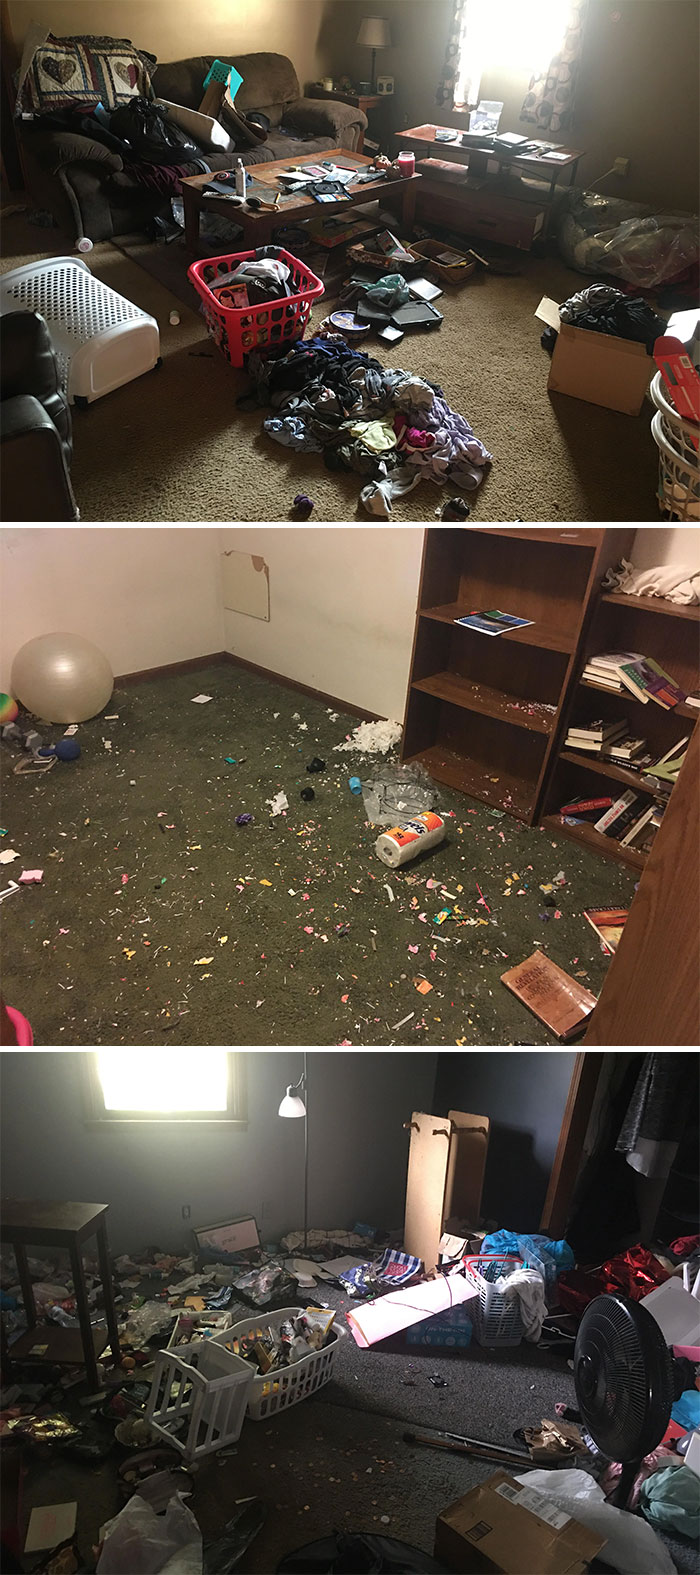 Former Tenants Of The Apartment Moved Out Recently And Left Their Place Looking Like This